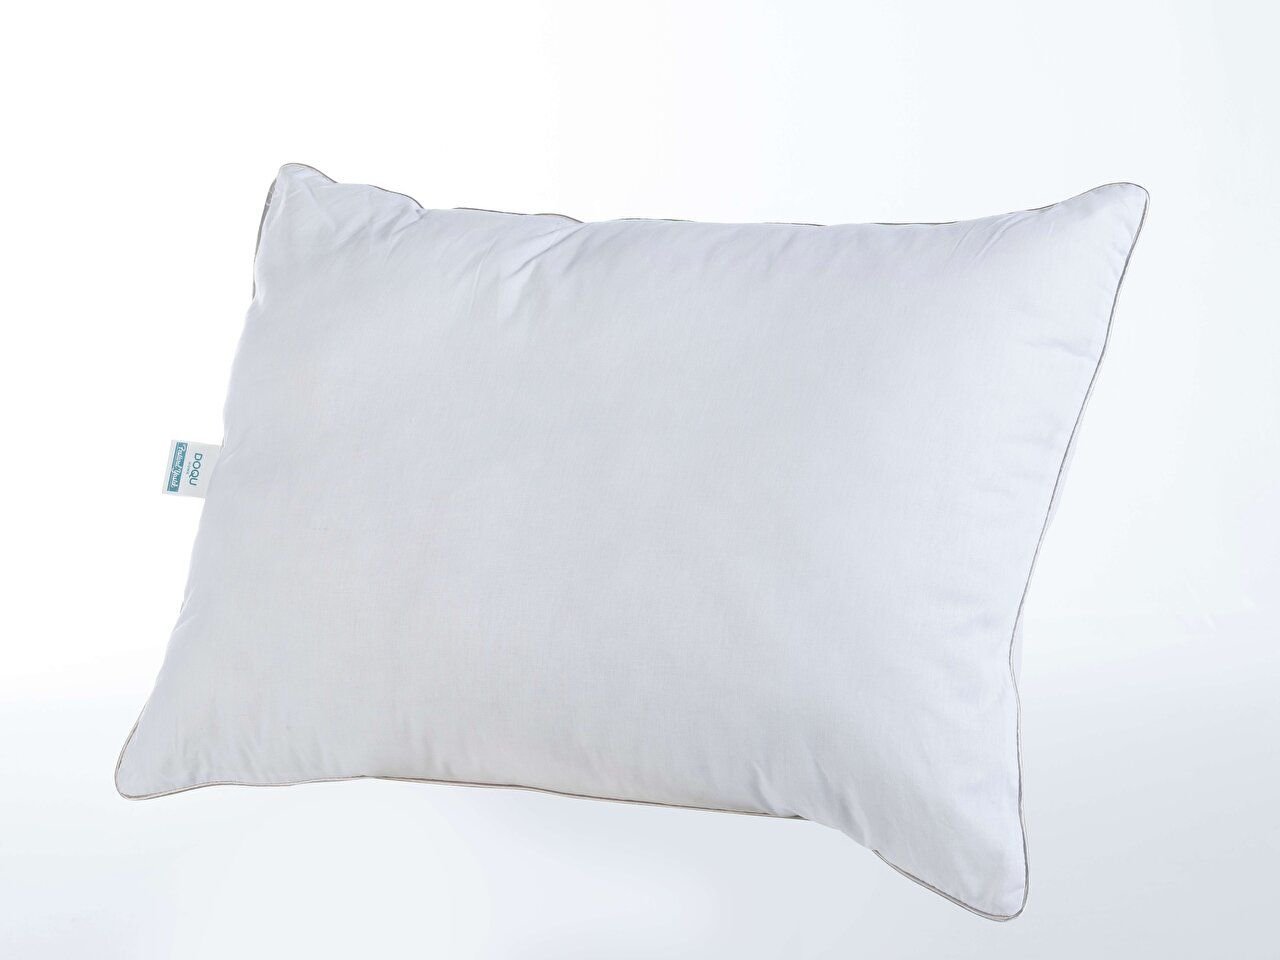 Cotton Pillow - Natural Comfort and Soft Support for a Peaceful Sleep